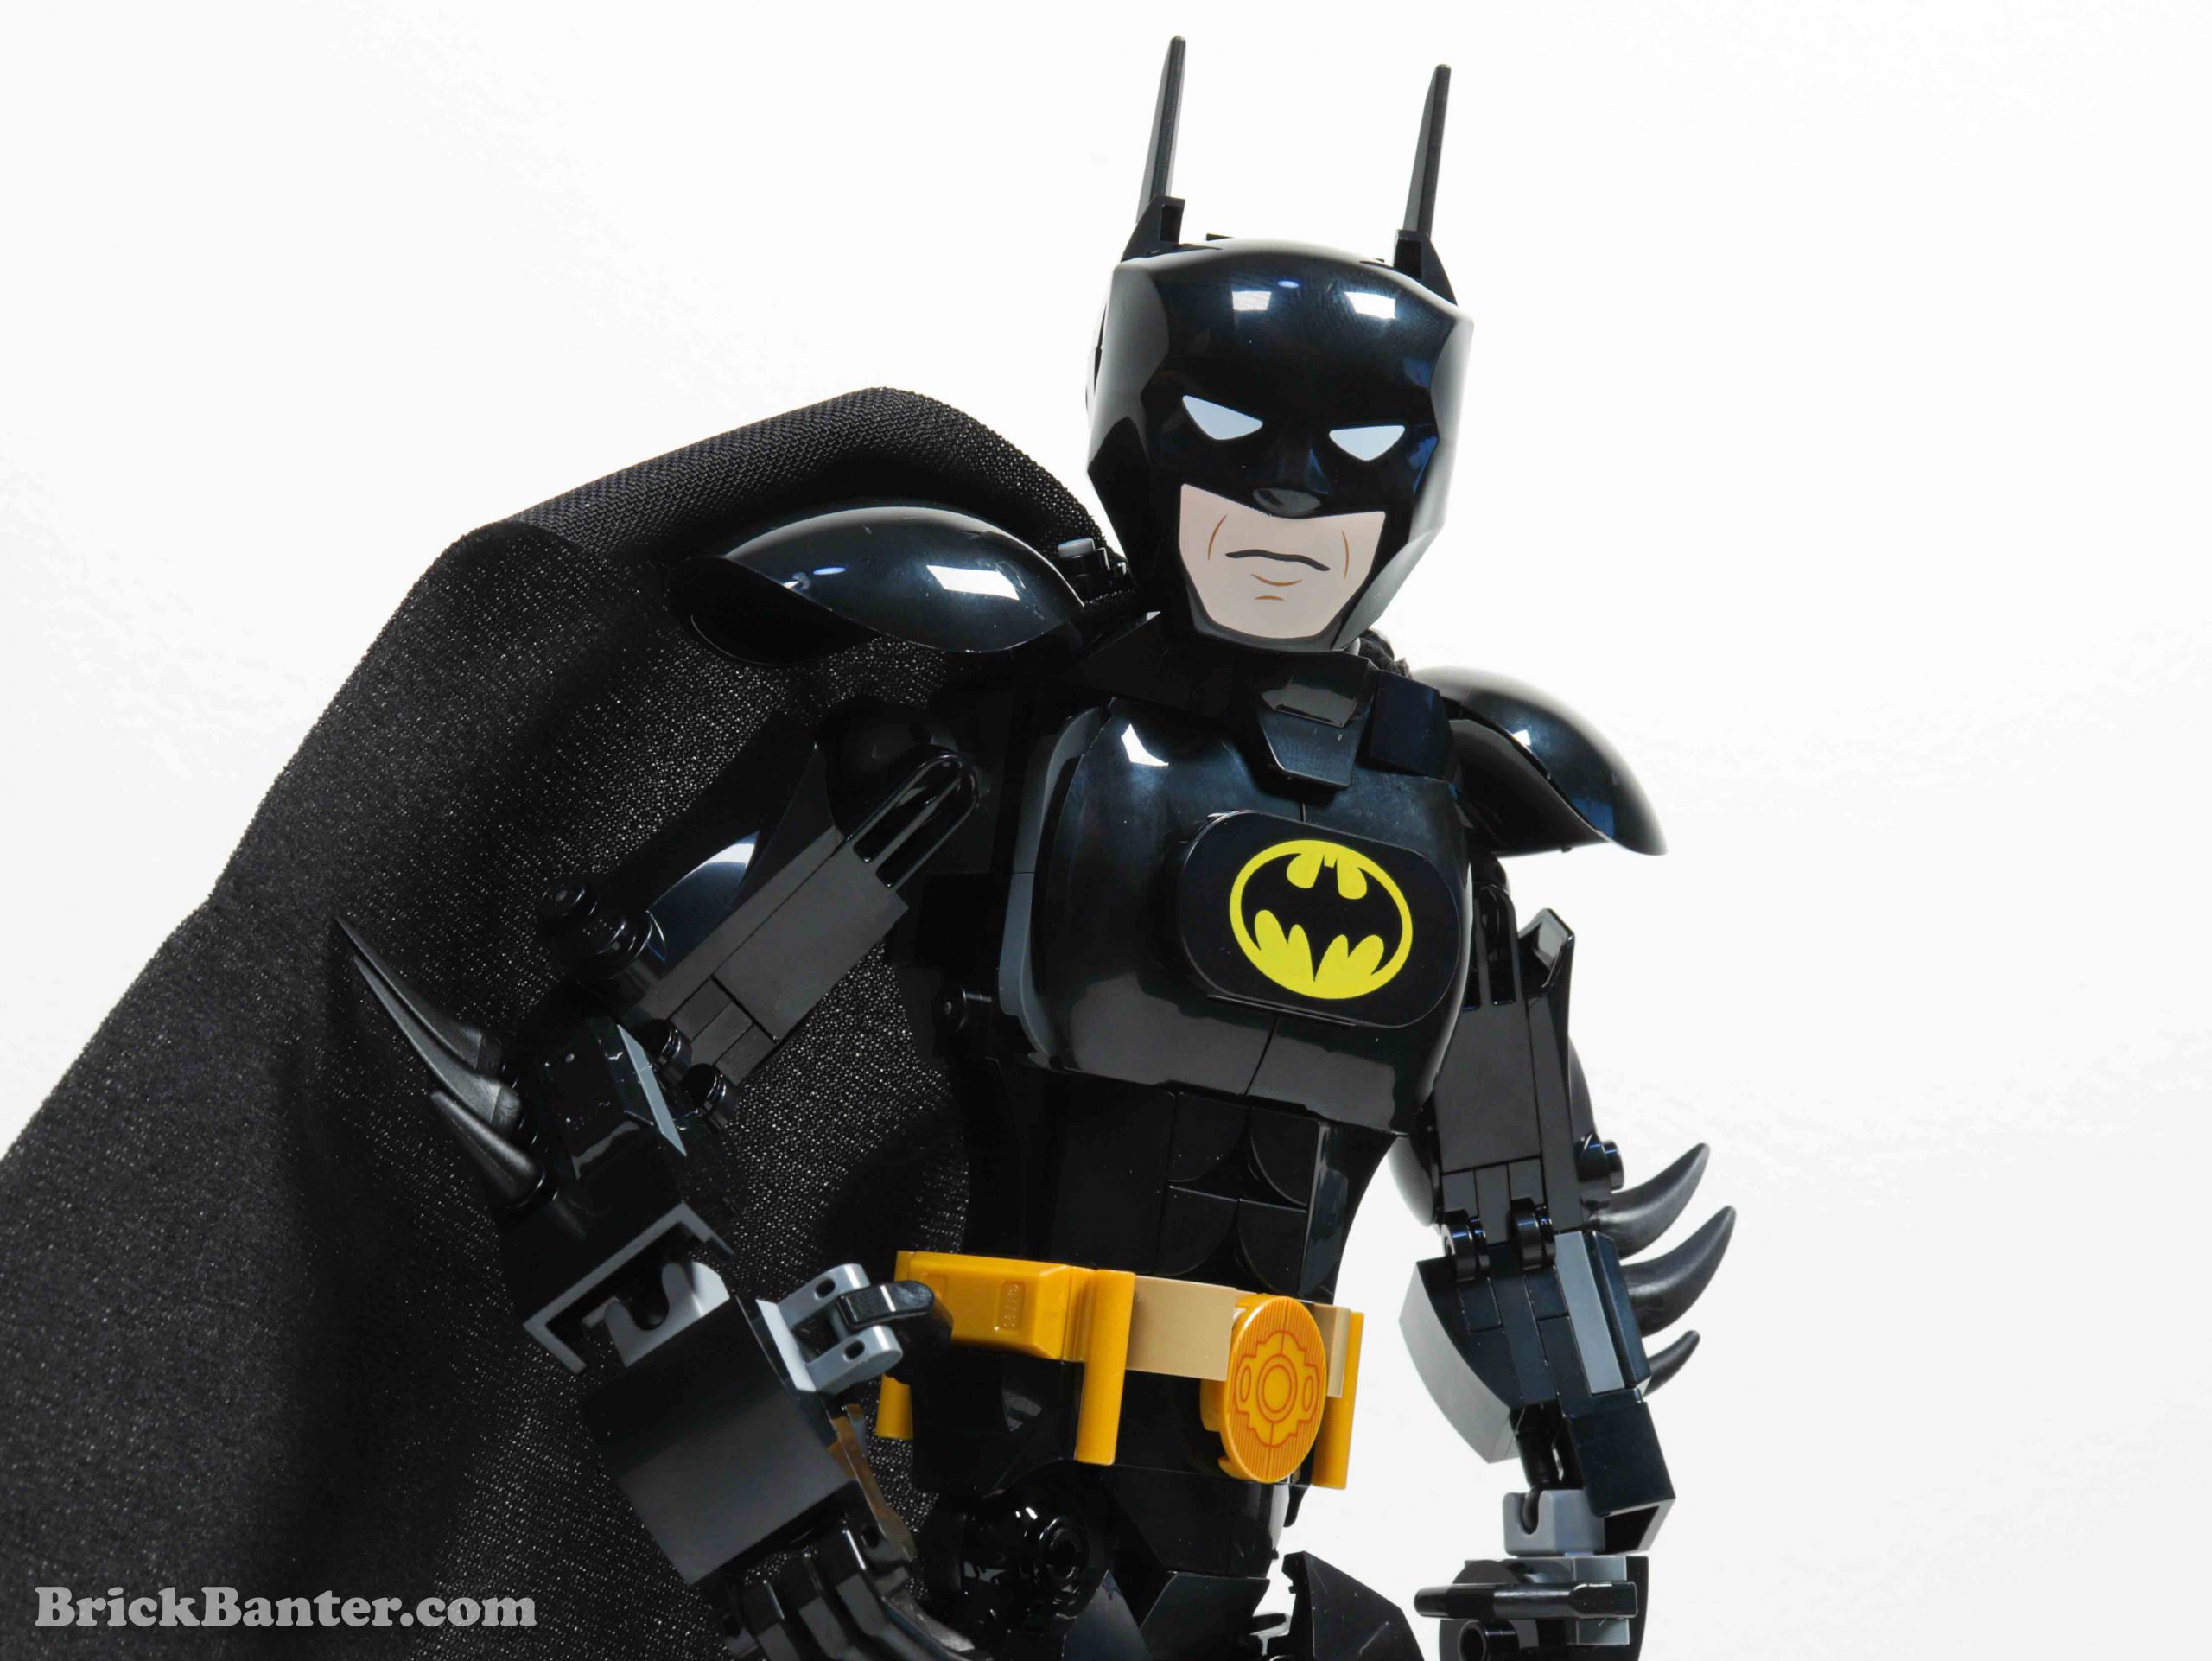 With a little help from the LEGO DC line of minifigures, the Black